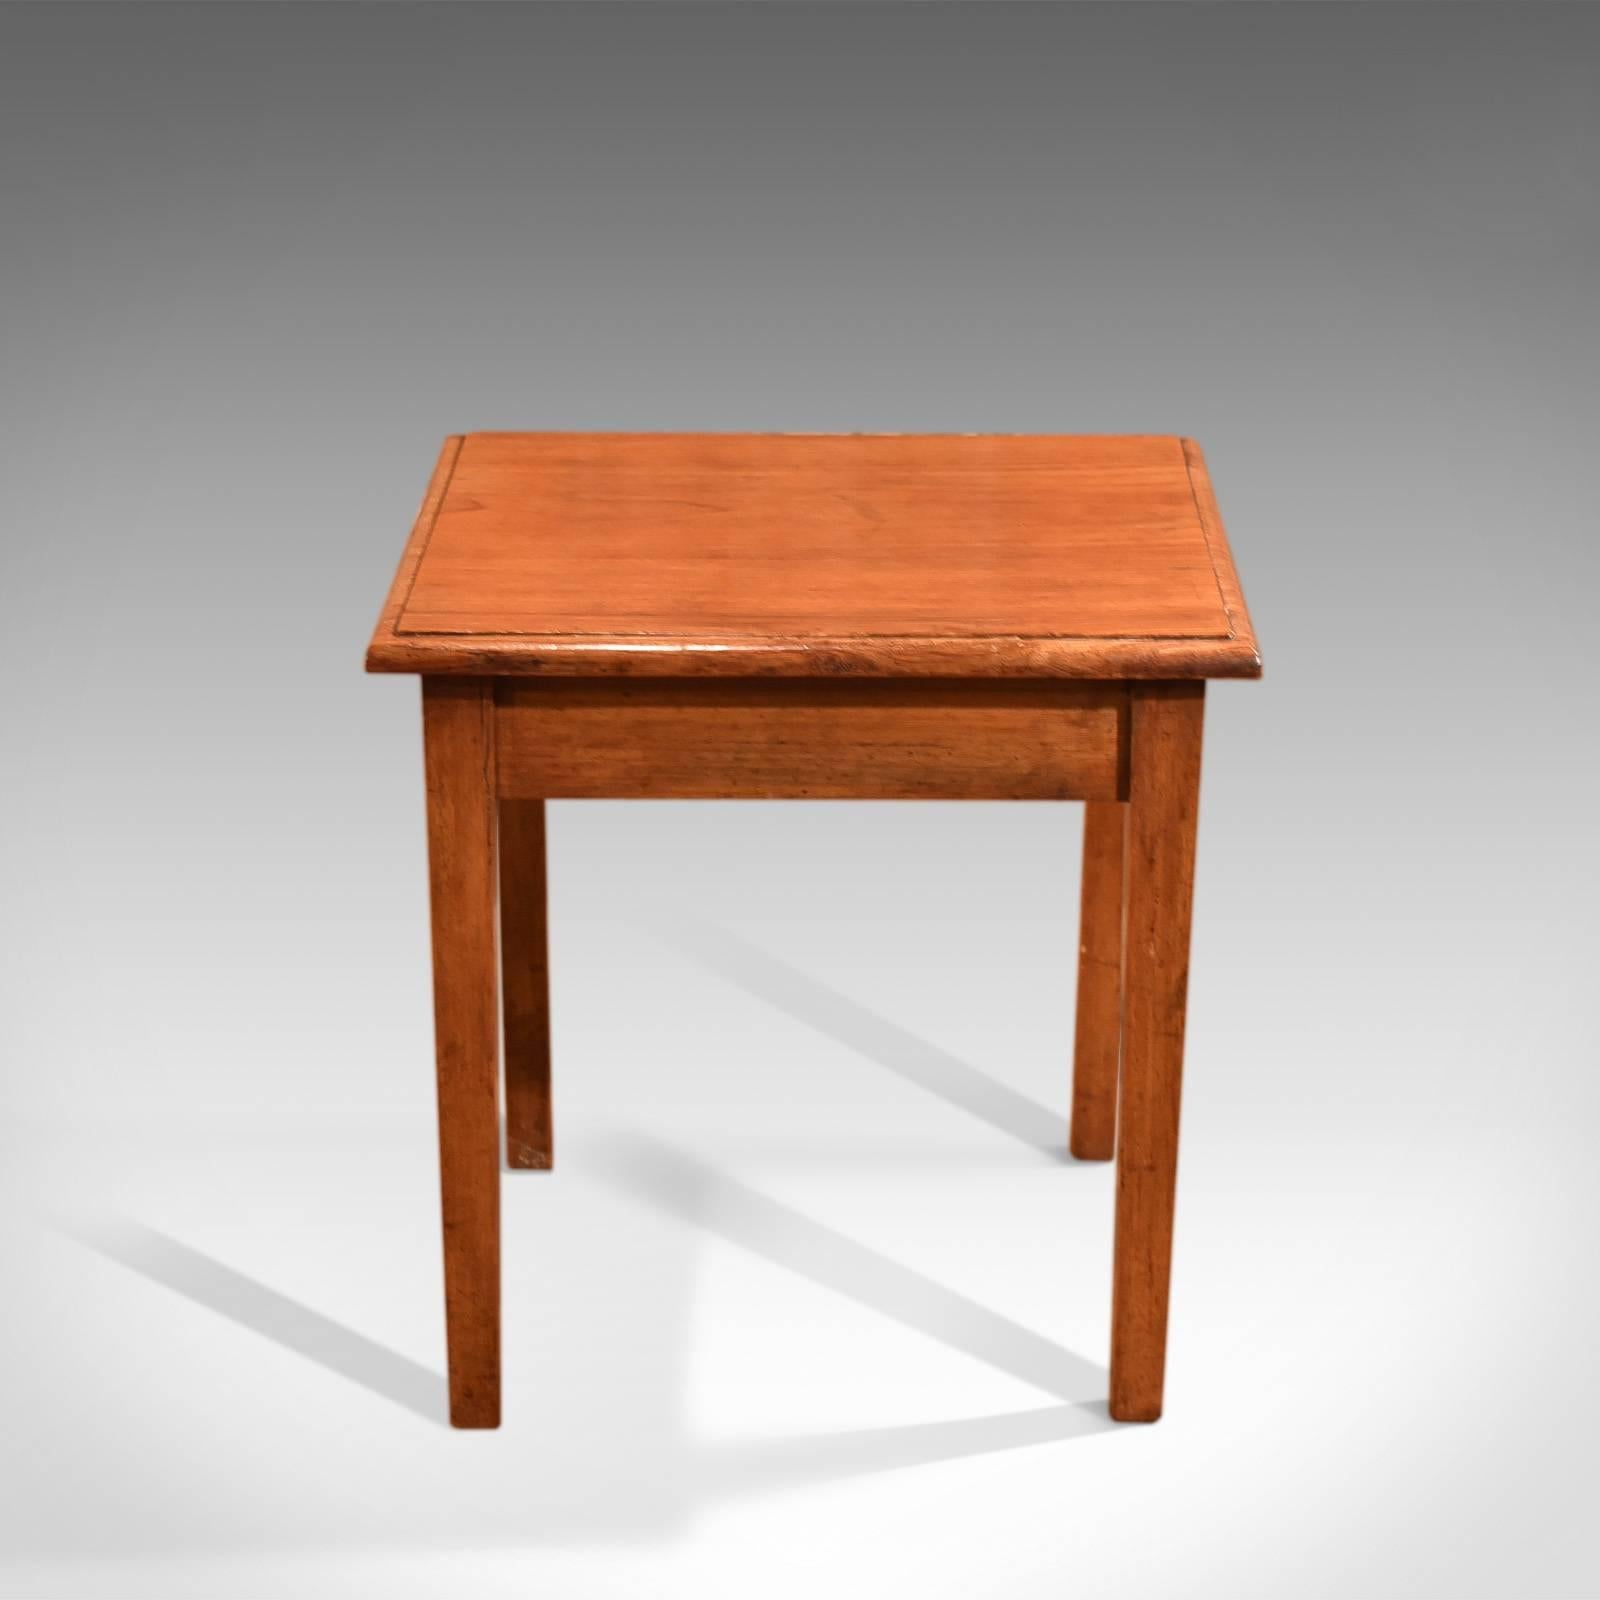 This is an antique, early 20th century side table dating to circa 1910.

Modest in form, this diminutive side table is in perfect proportion at 46cm (18 inches) in all axis.

Raised on gently tapered, square section legs united by a plain apron